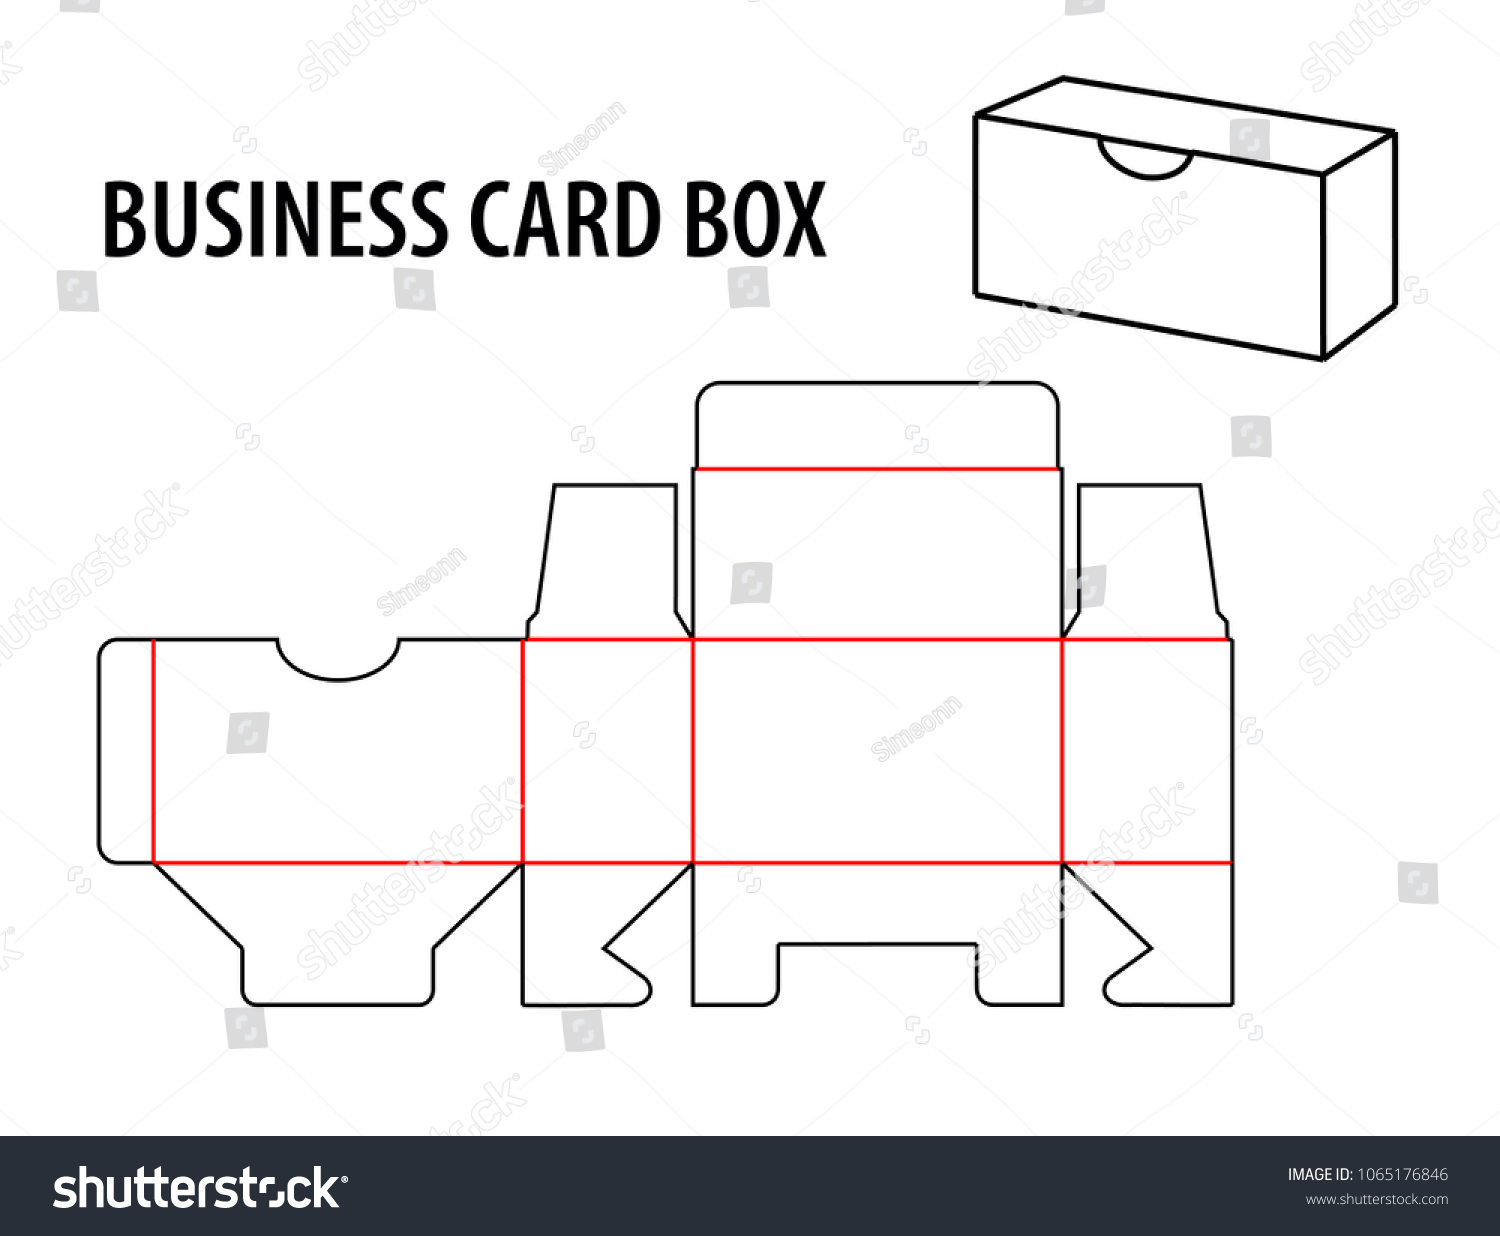 business card box template free download